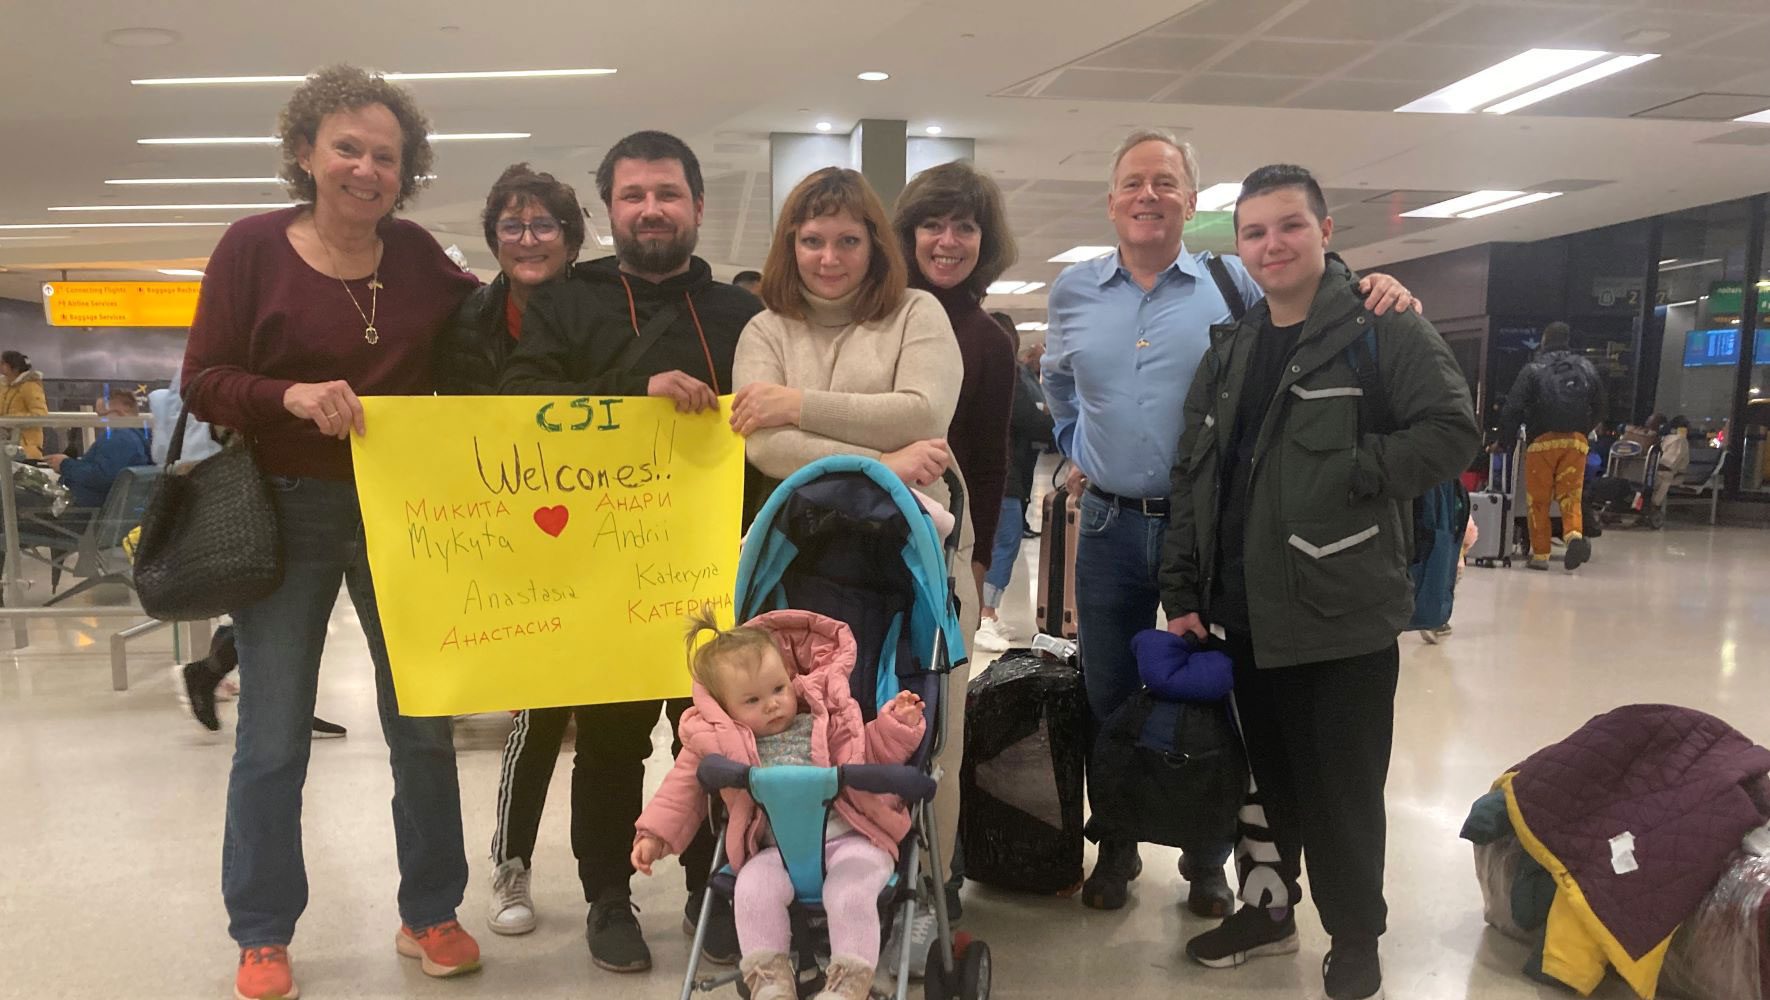 A HIAS Welcome Circle from Westchester County in New York greets a Ukrainian family at Newark International Airport. | How Canada Inspired “Revolutionary” Welcome Corps - HIAS